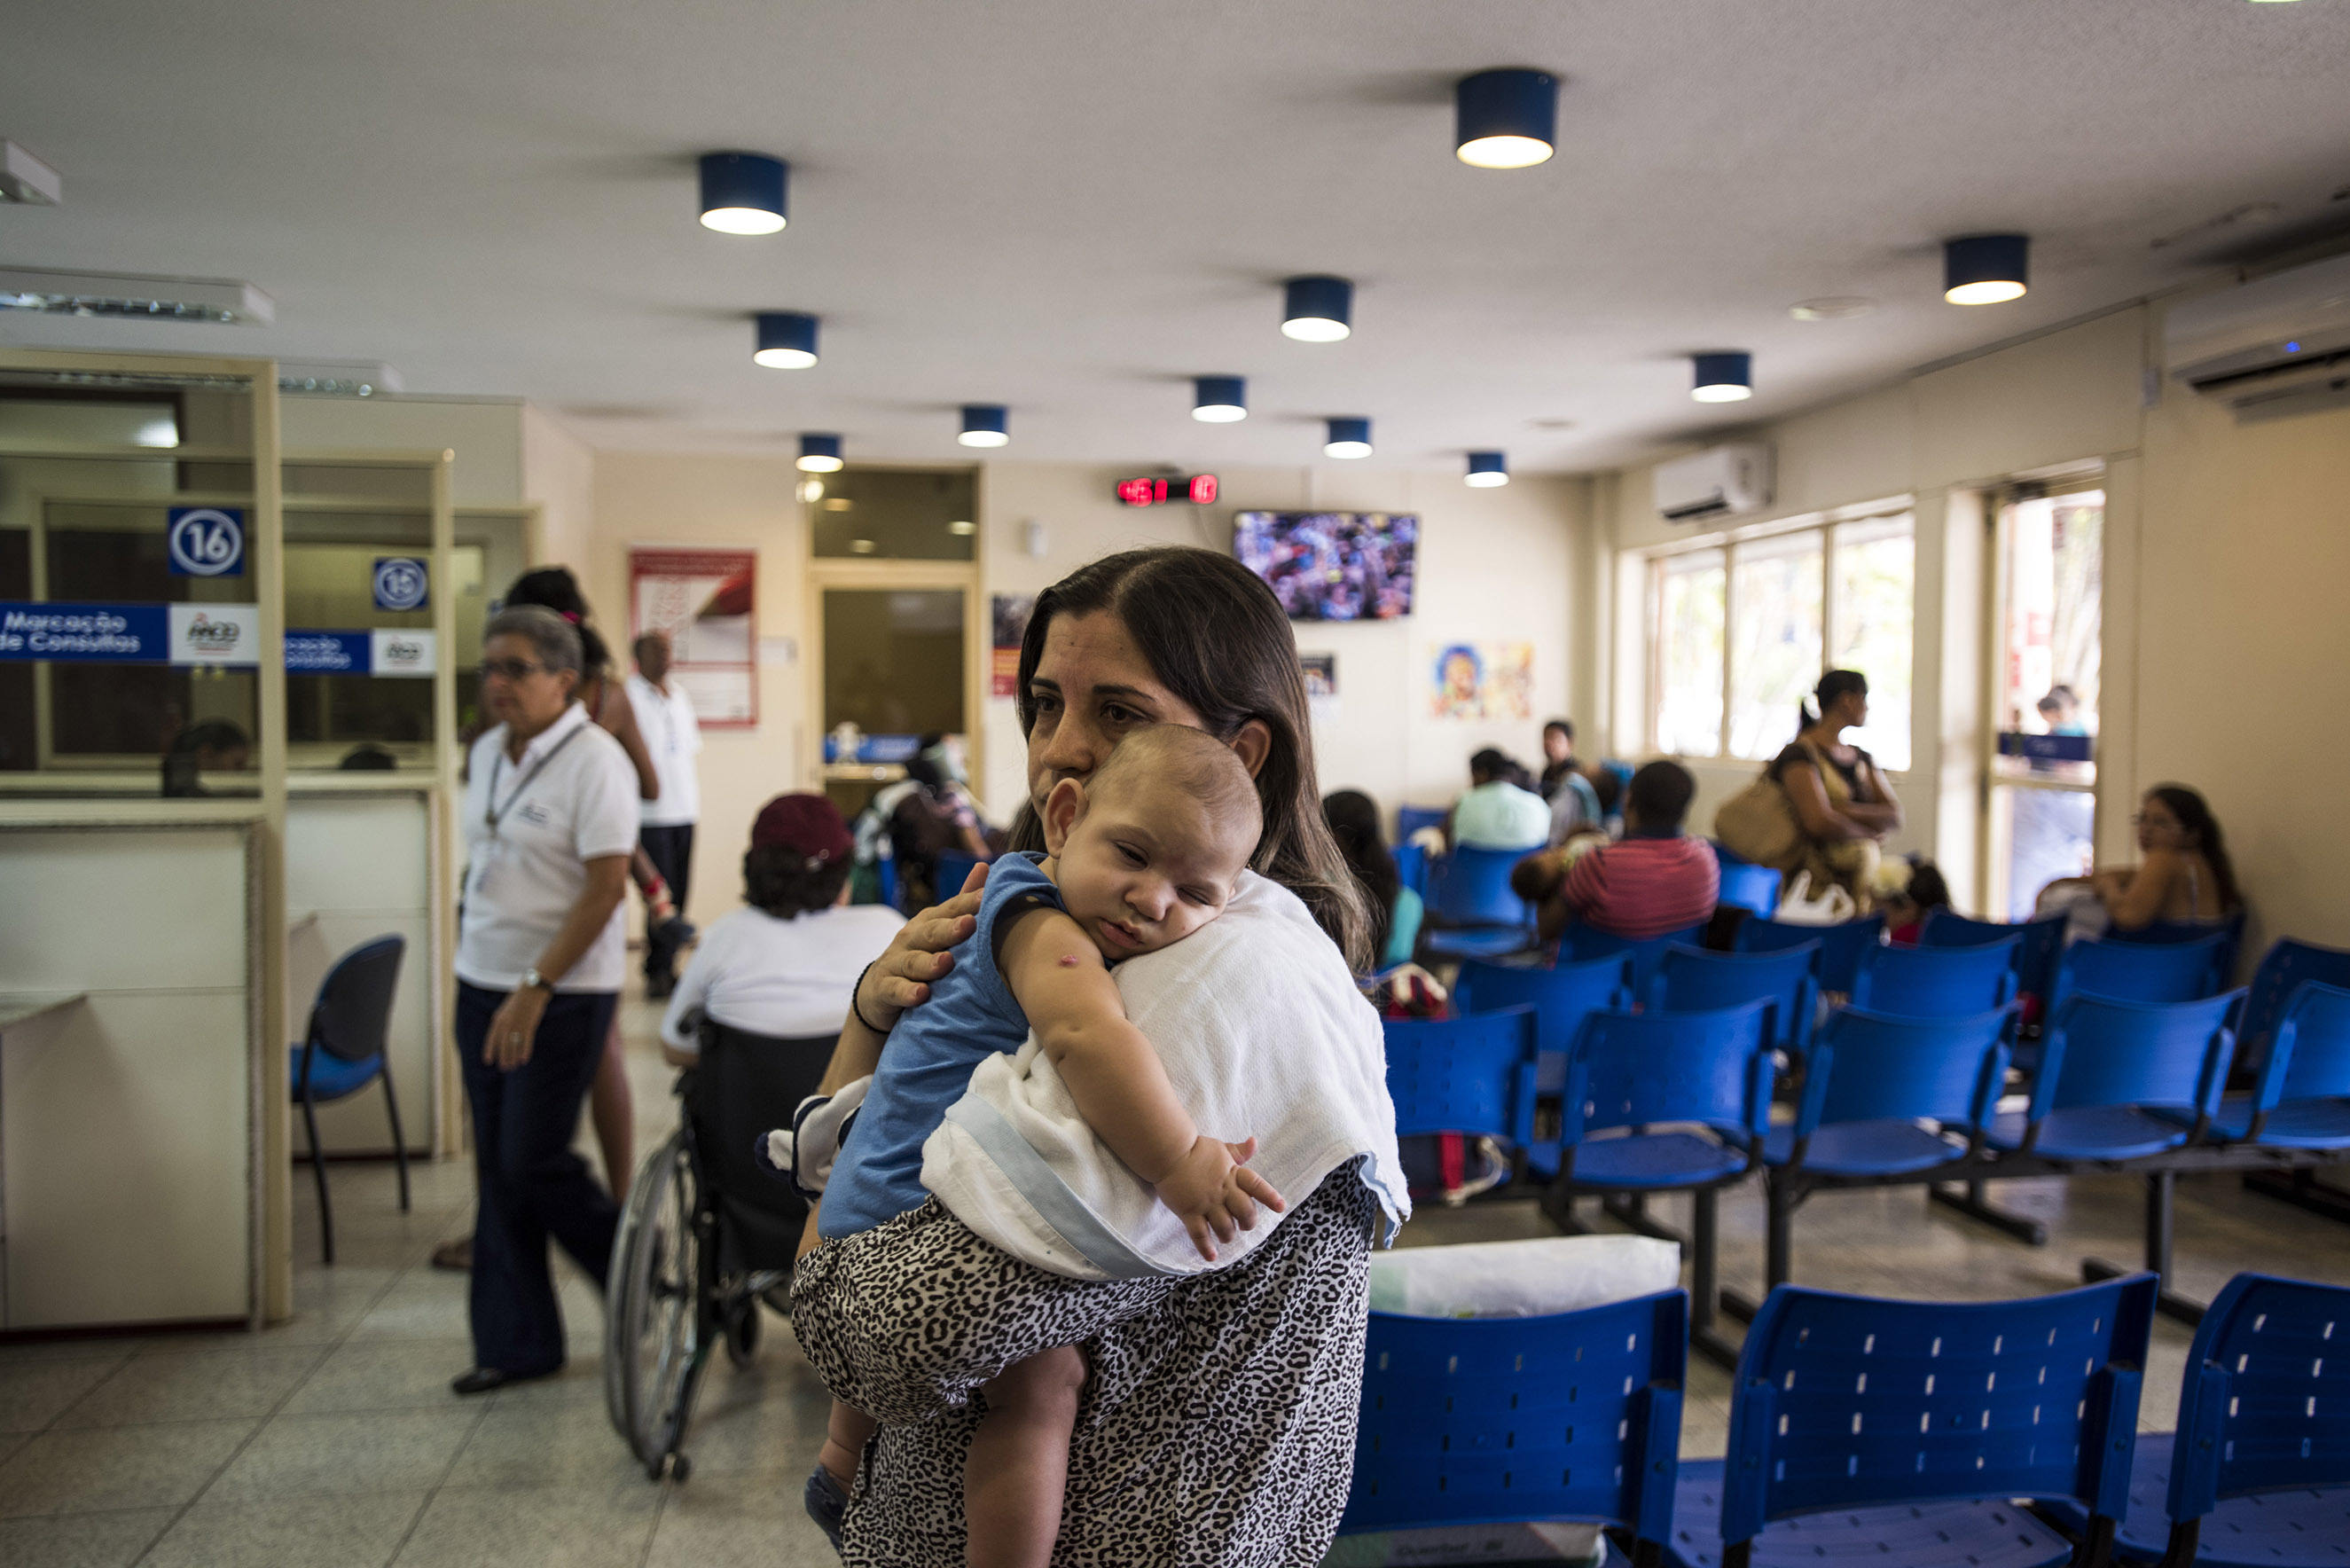 Isabel Albuquerque and her son in the waiting room of Associacao de Assistencia a Crianca Deficiente, a rehabilitation center for disabled children, in Recife, Brazil, Feb. 1, 2016. (Sebastian Liste—NOOR for TIME)